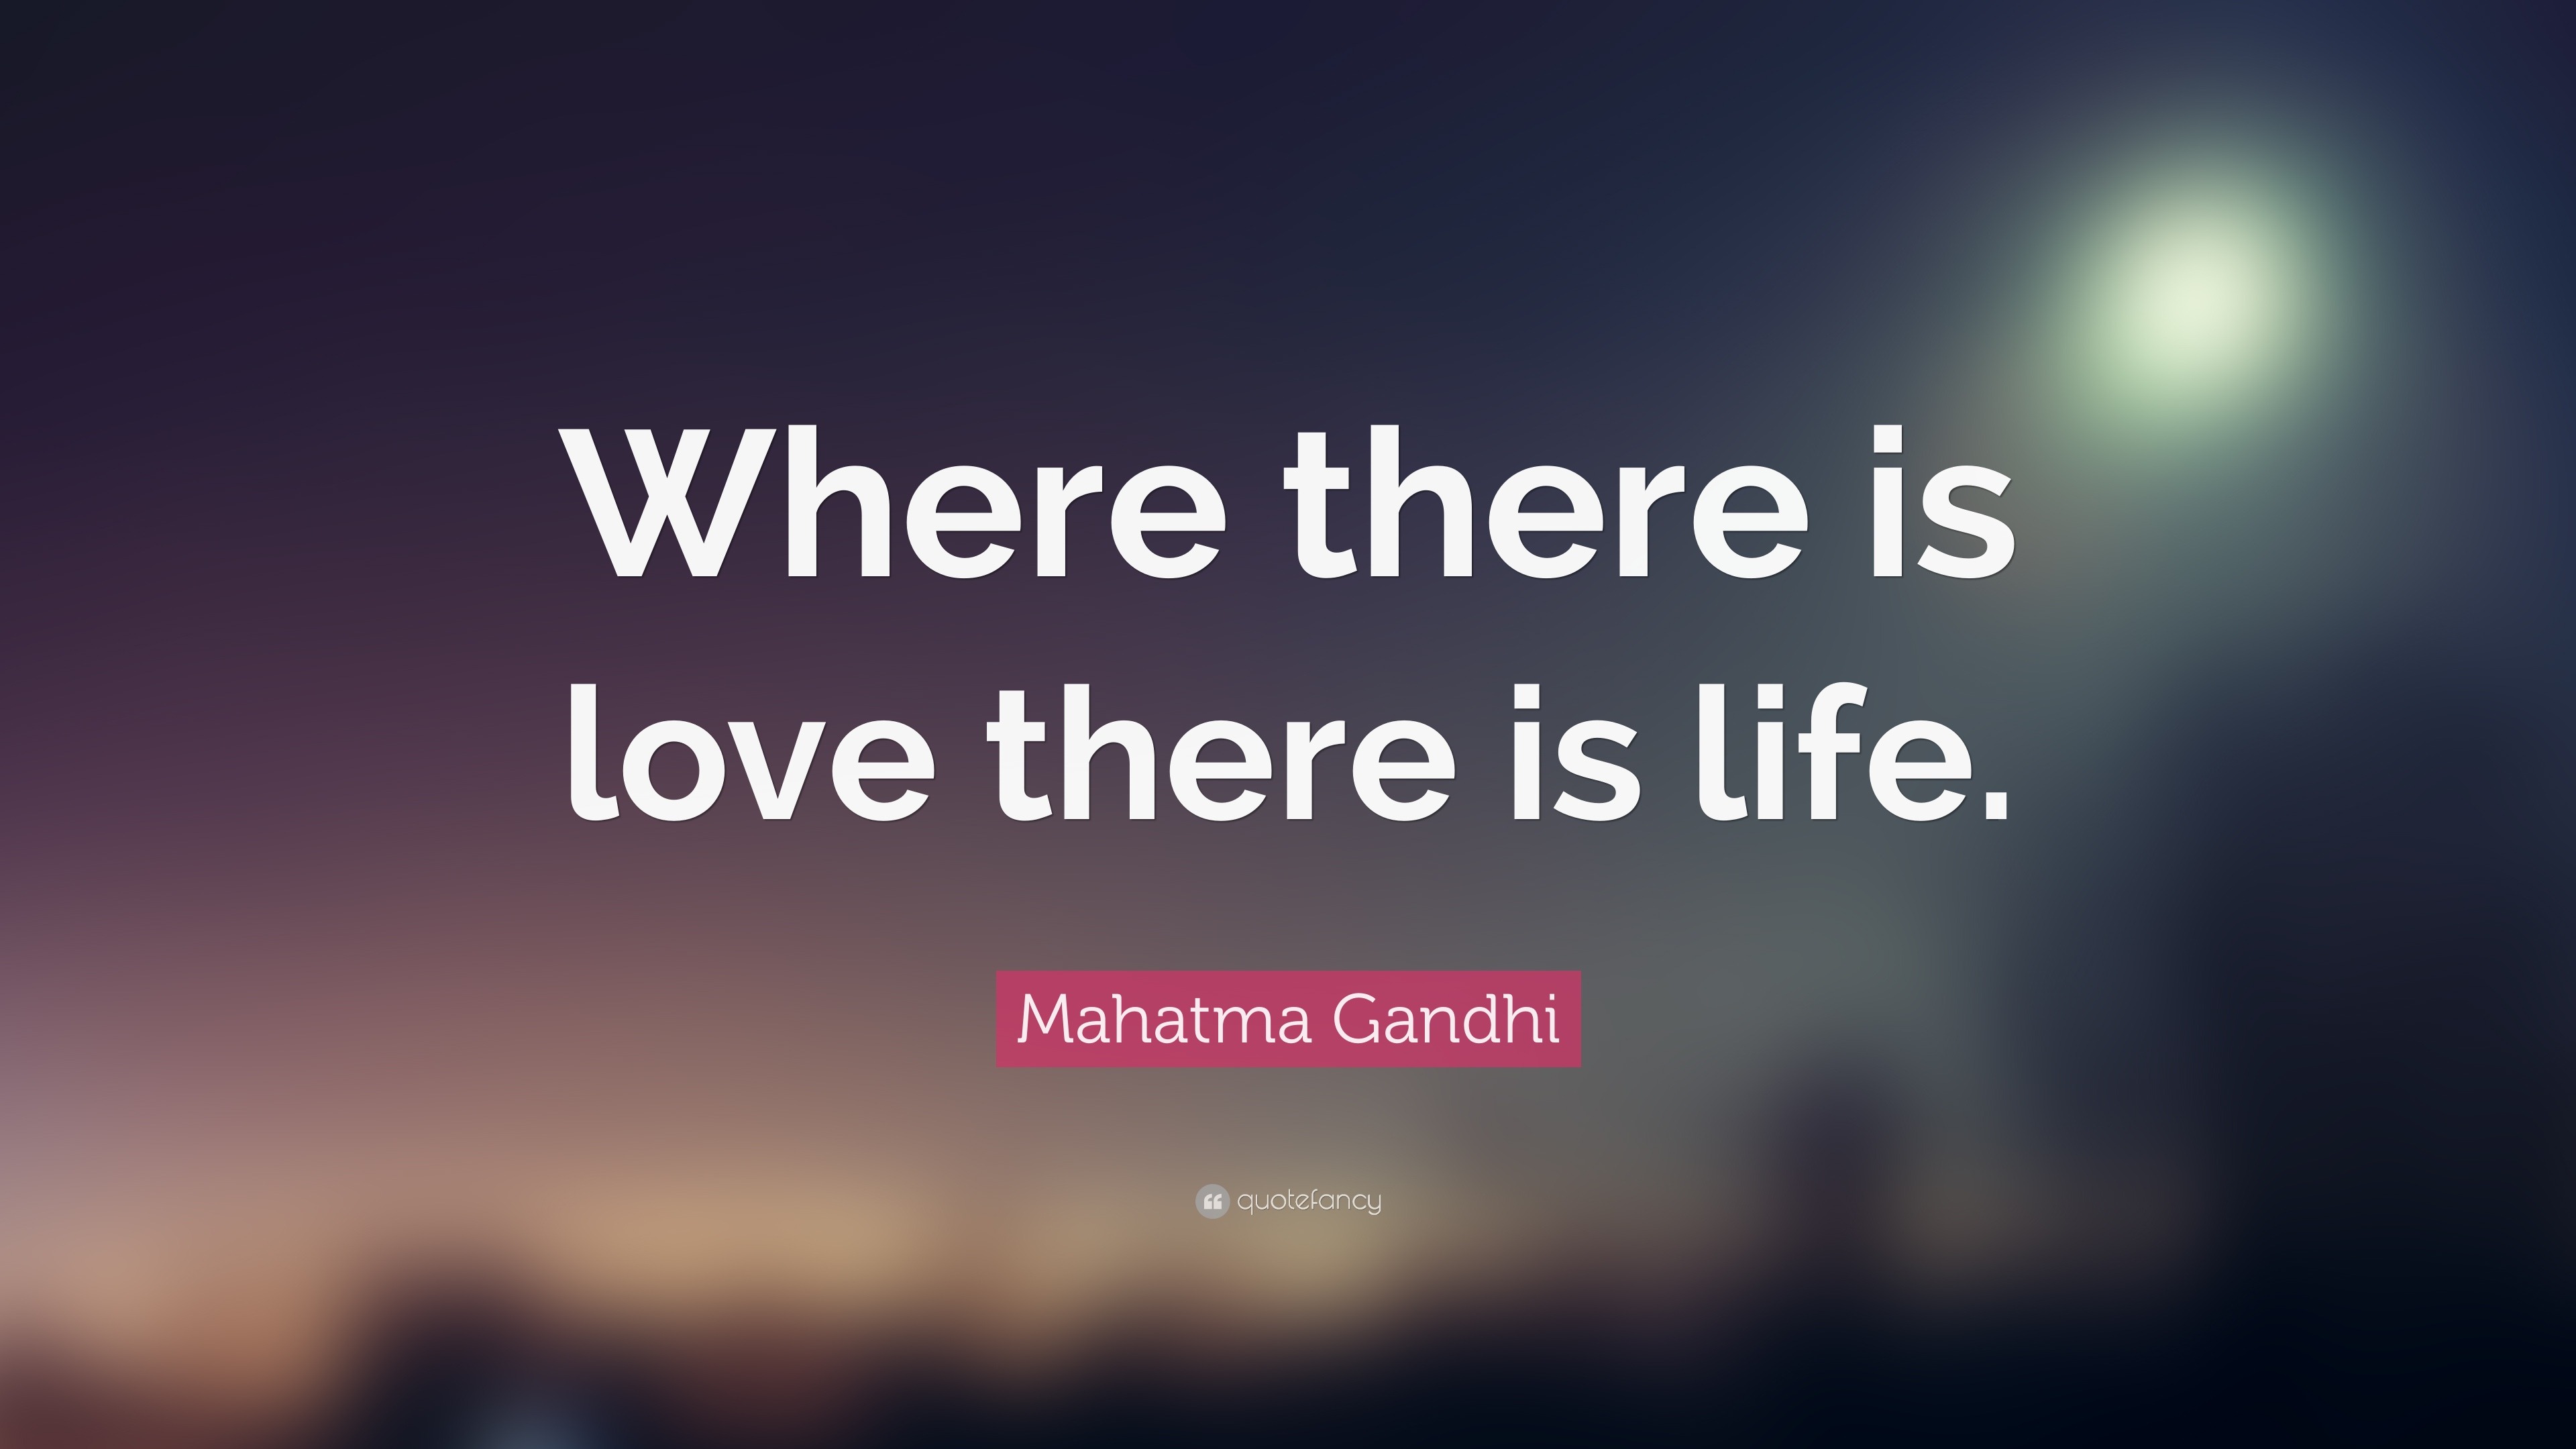 Mahatma Gandhi Quote Where there is love there is life